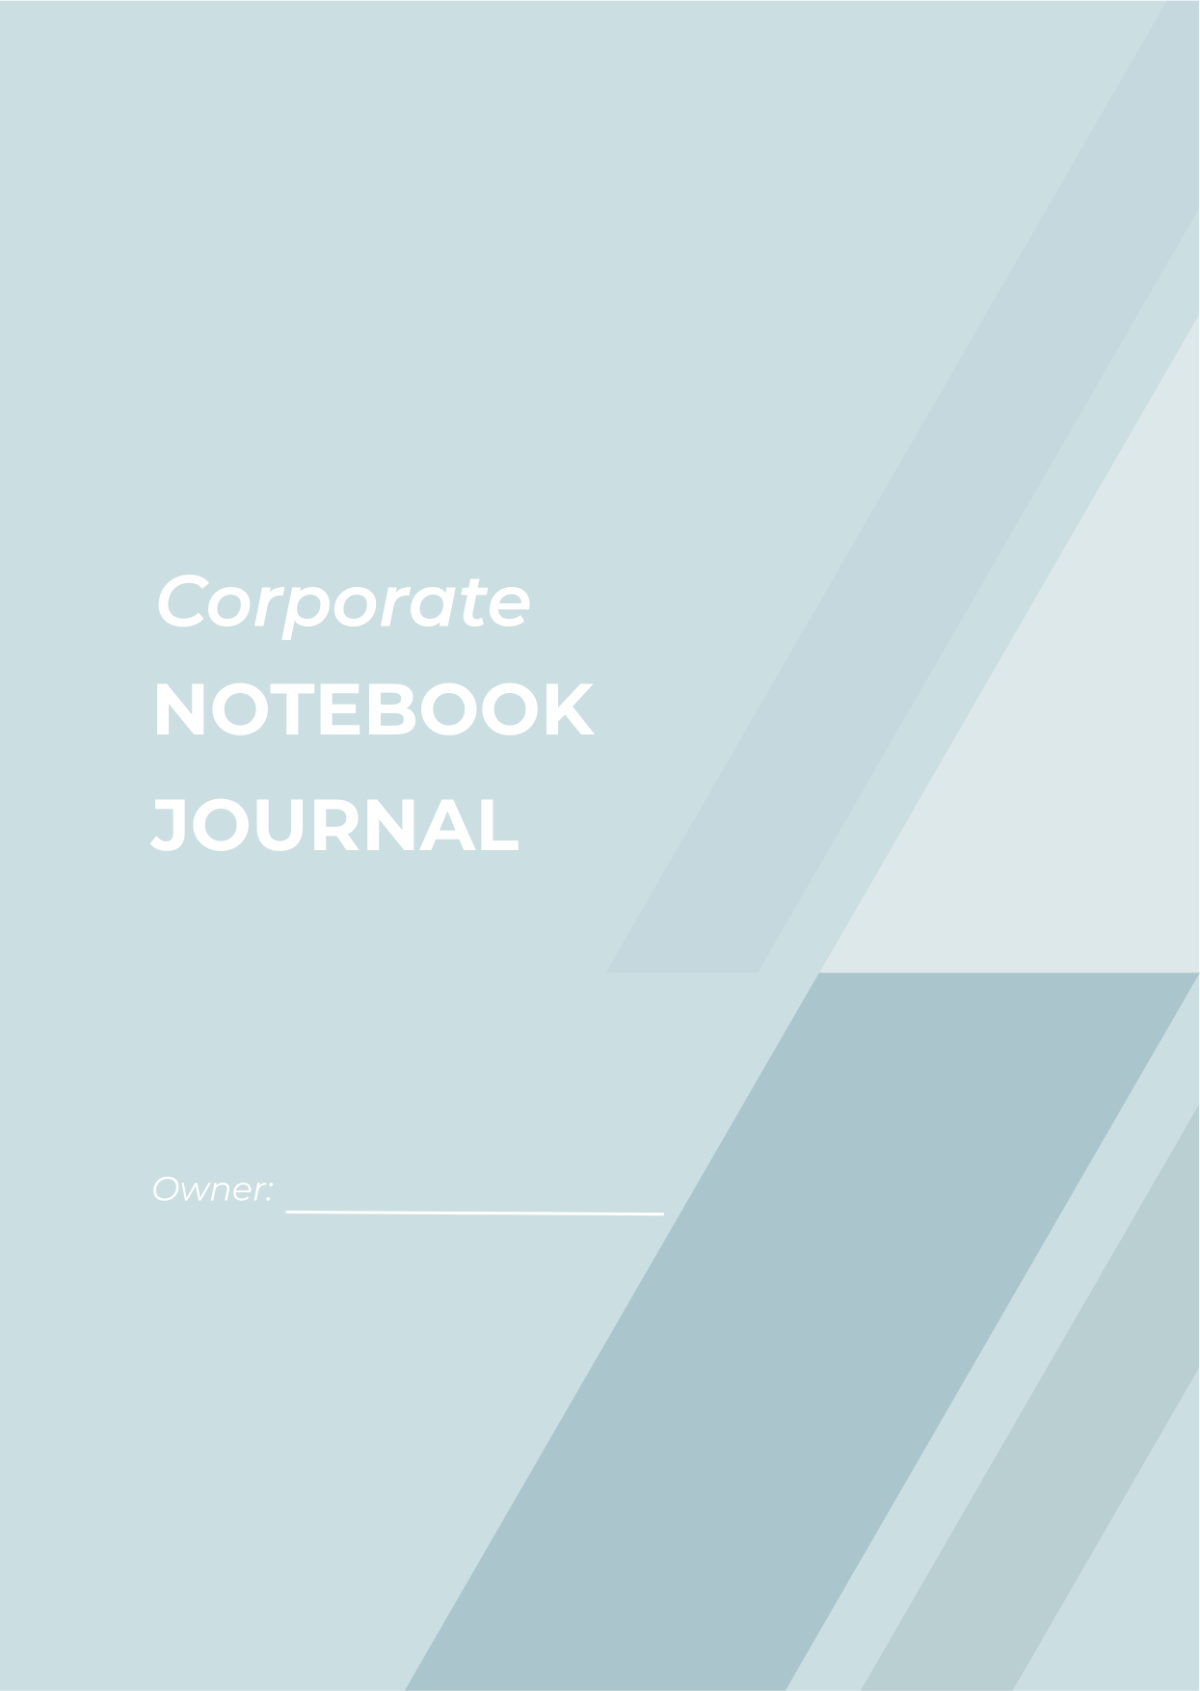 Free Corporate Notebook Journals Template